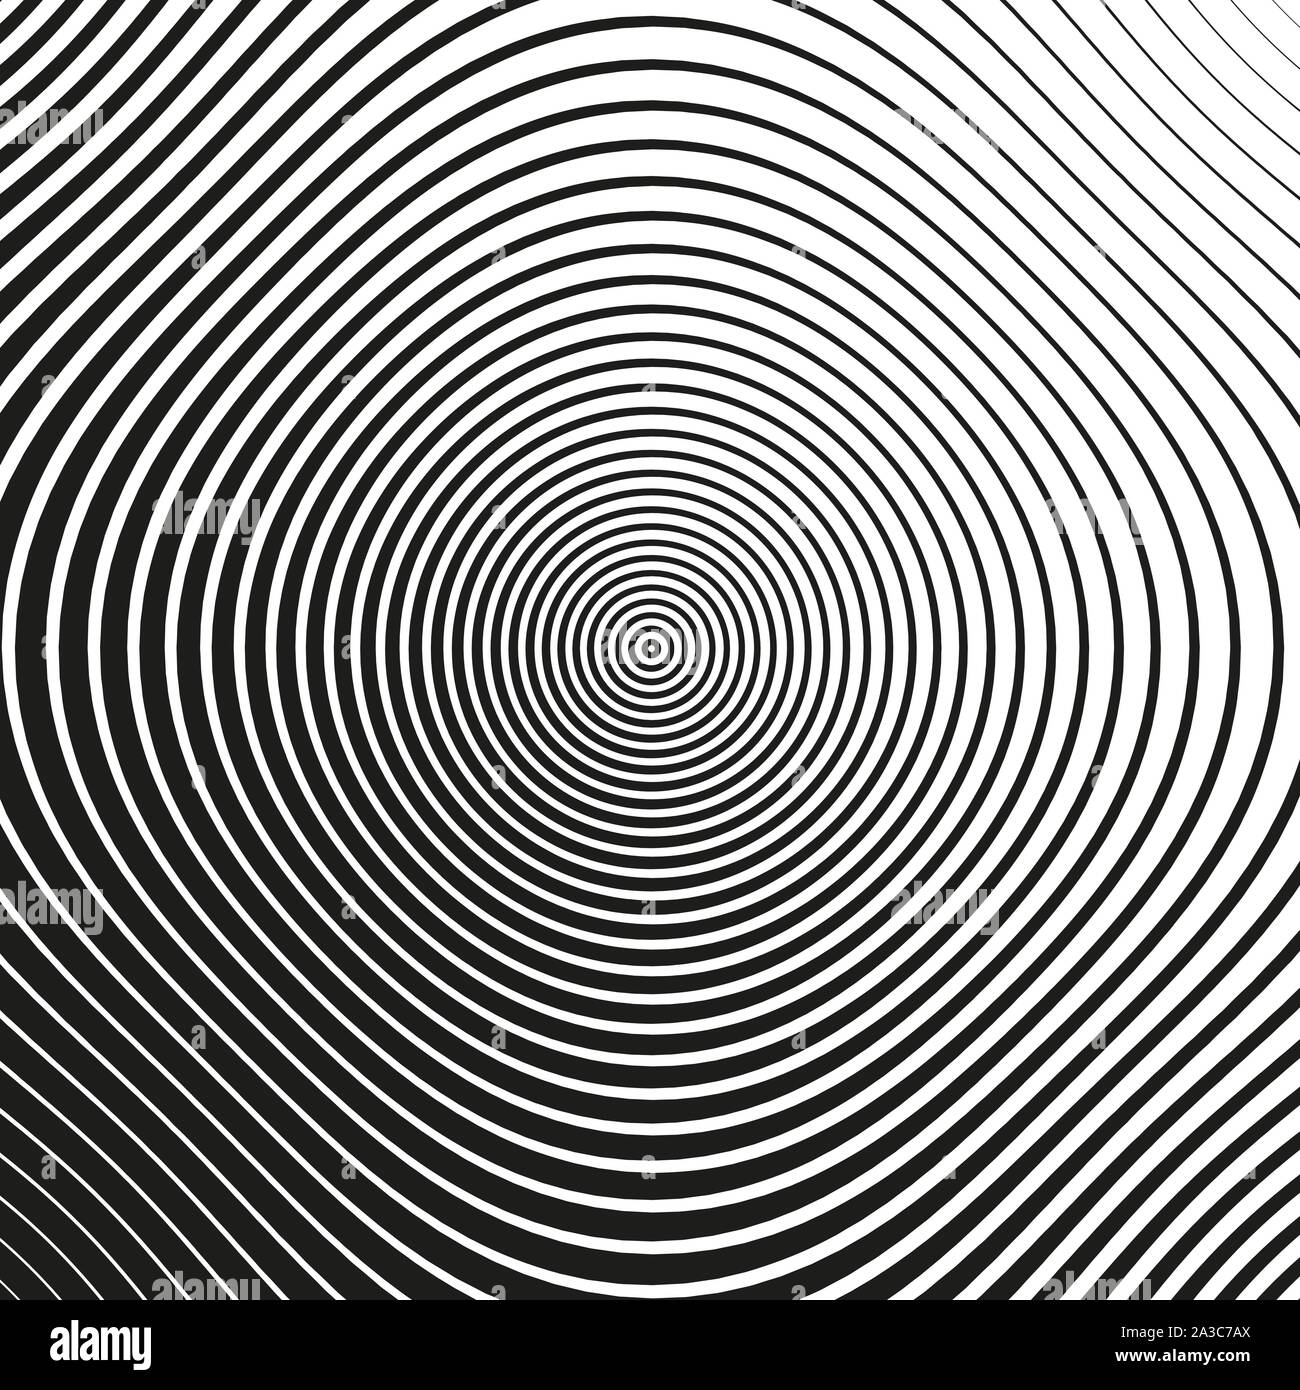 Black and white abstract modern concentric circles texture, background pattern. Vector illustration. Halftone background. Stock Vector